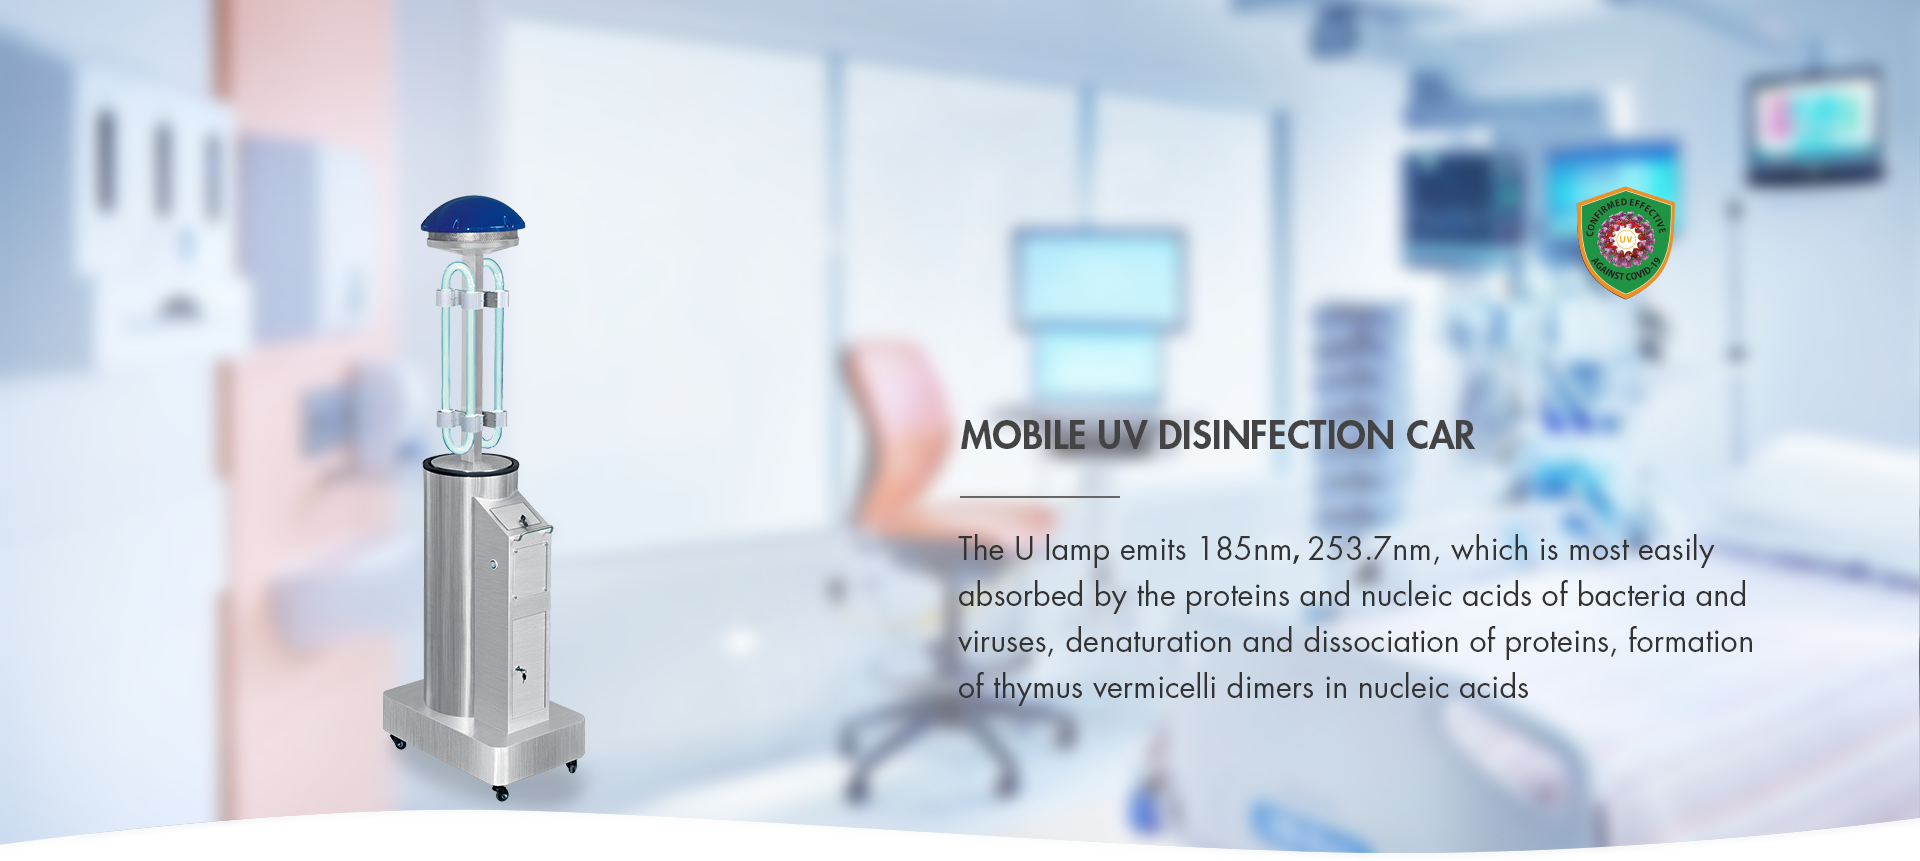 Mobile UV Disinfection Car